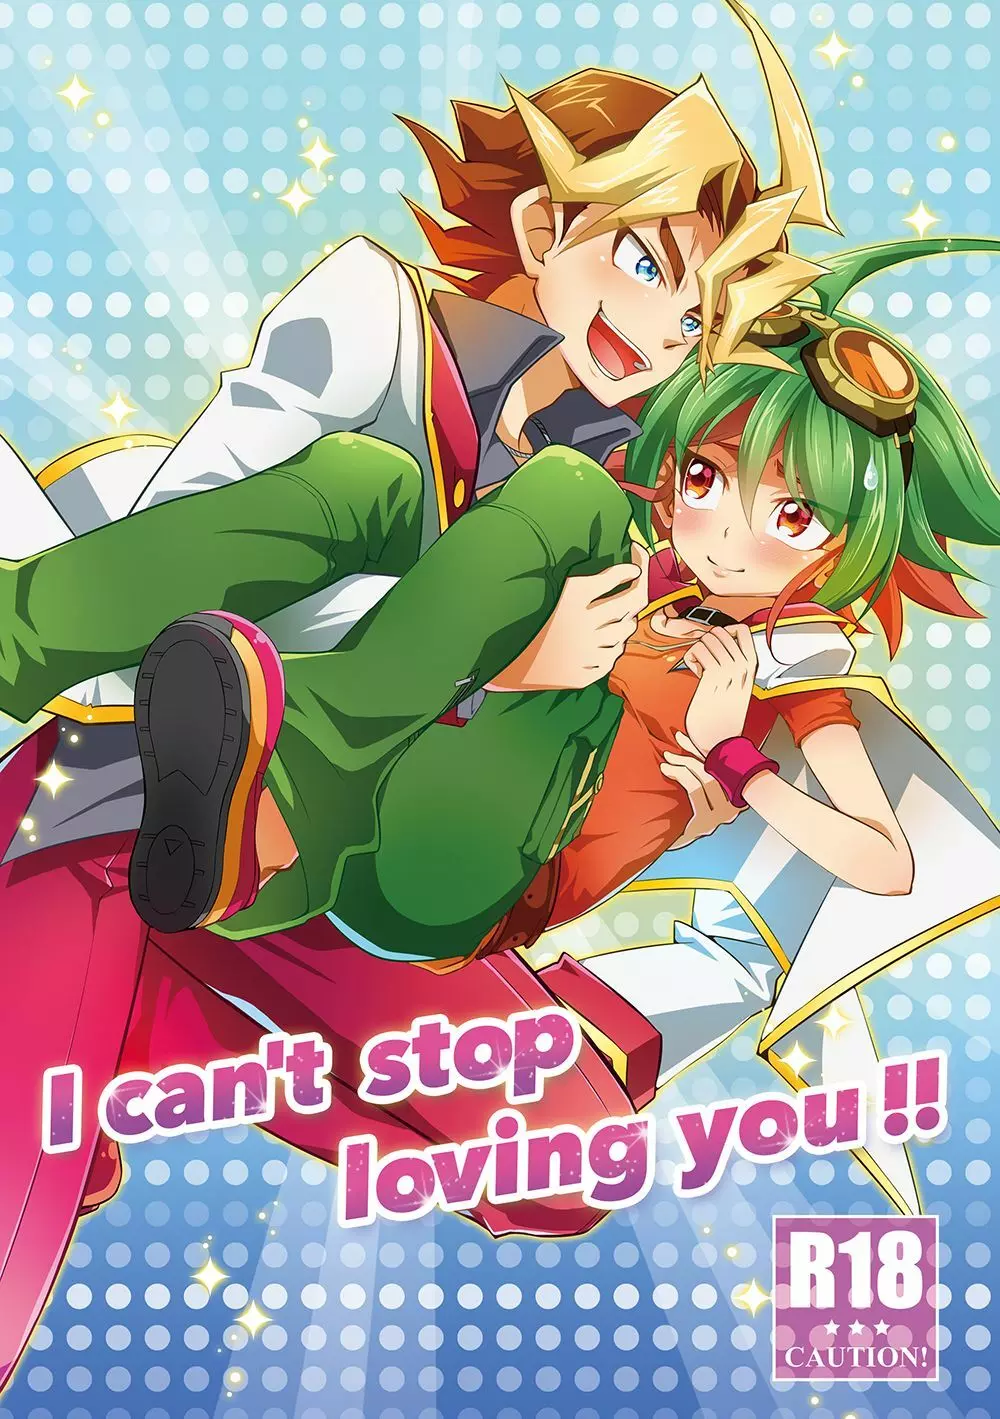 I can't stop loving you!! - page1